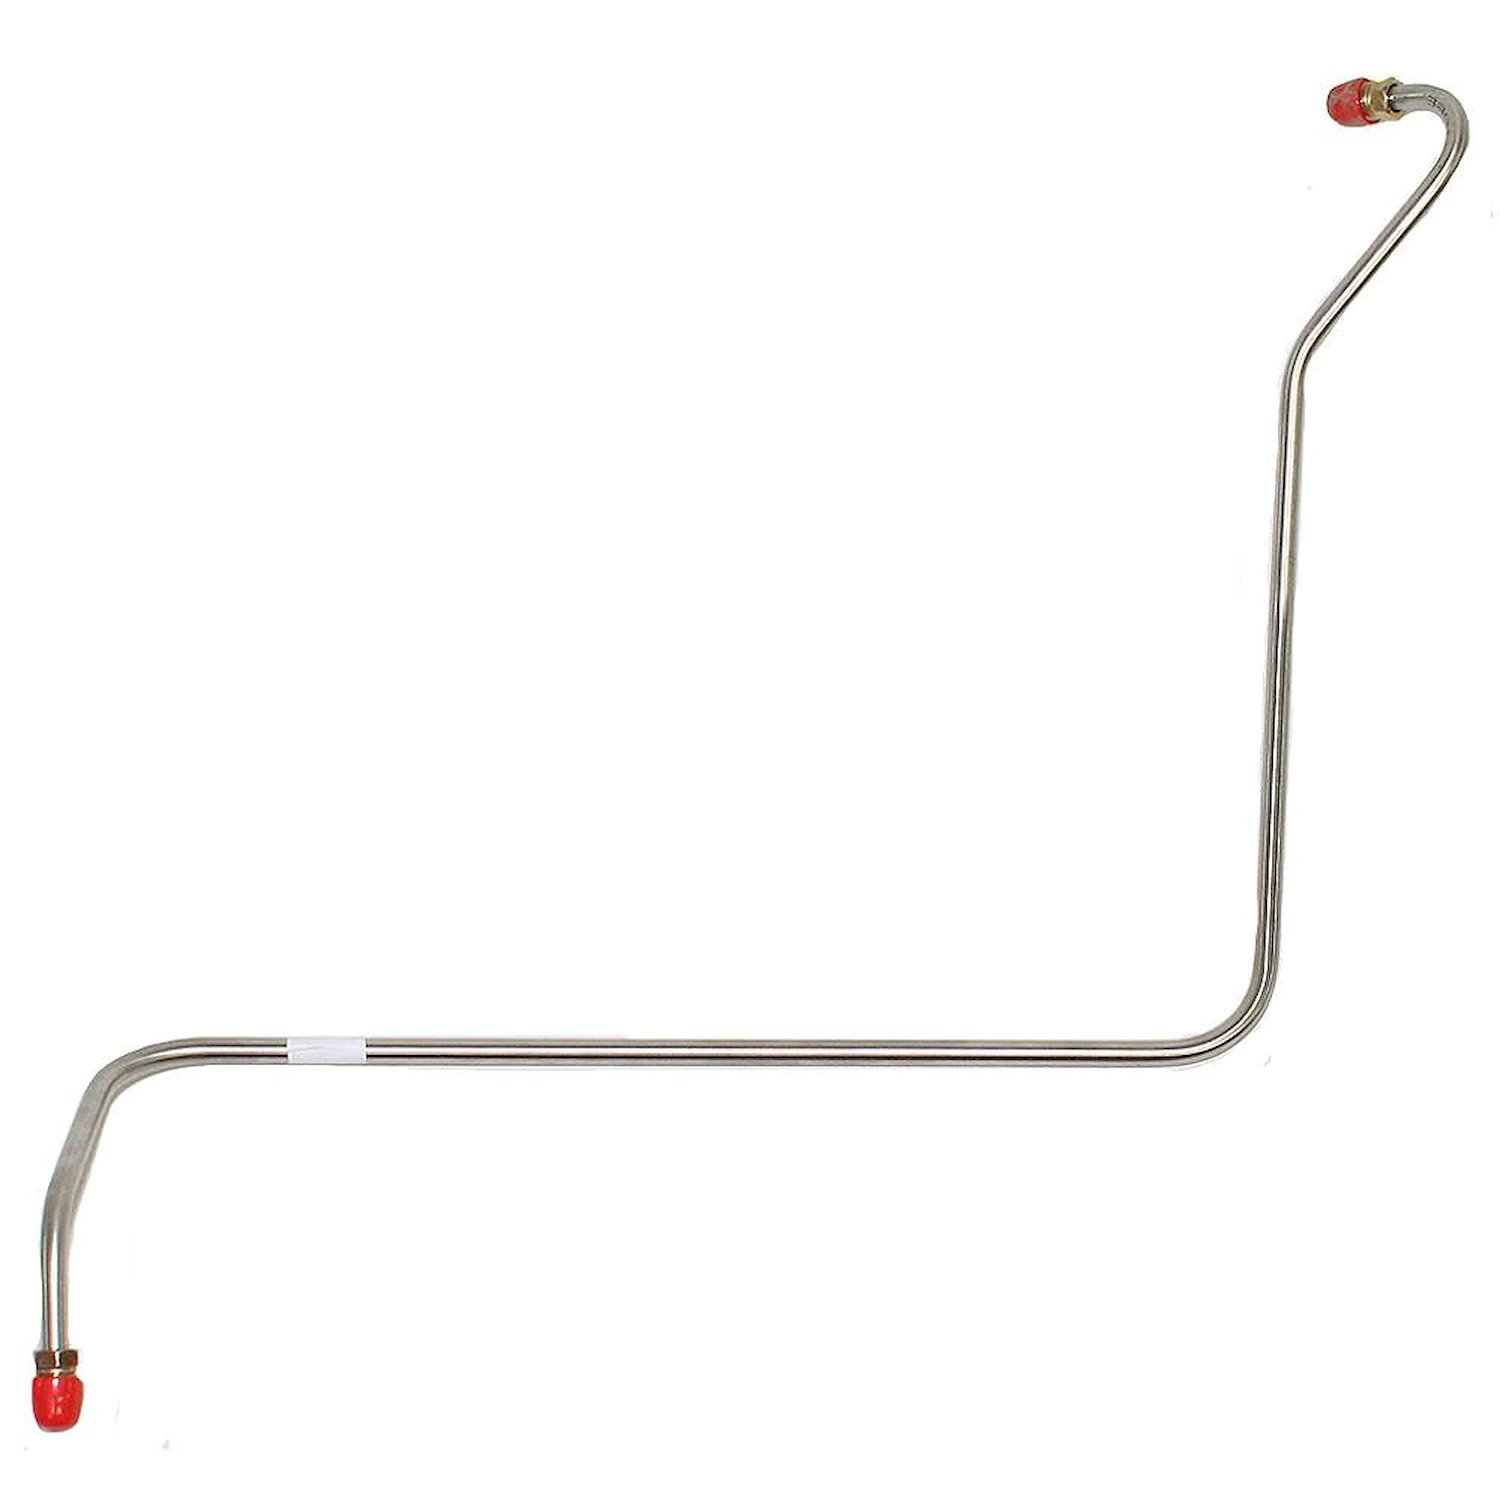 Fuel Line, Fuel Pump to Carburetor for Select 1966 Chevrolet Models with 327 Carter 4-bbl Engine 275 HP [Stainless Steel]